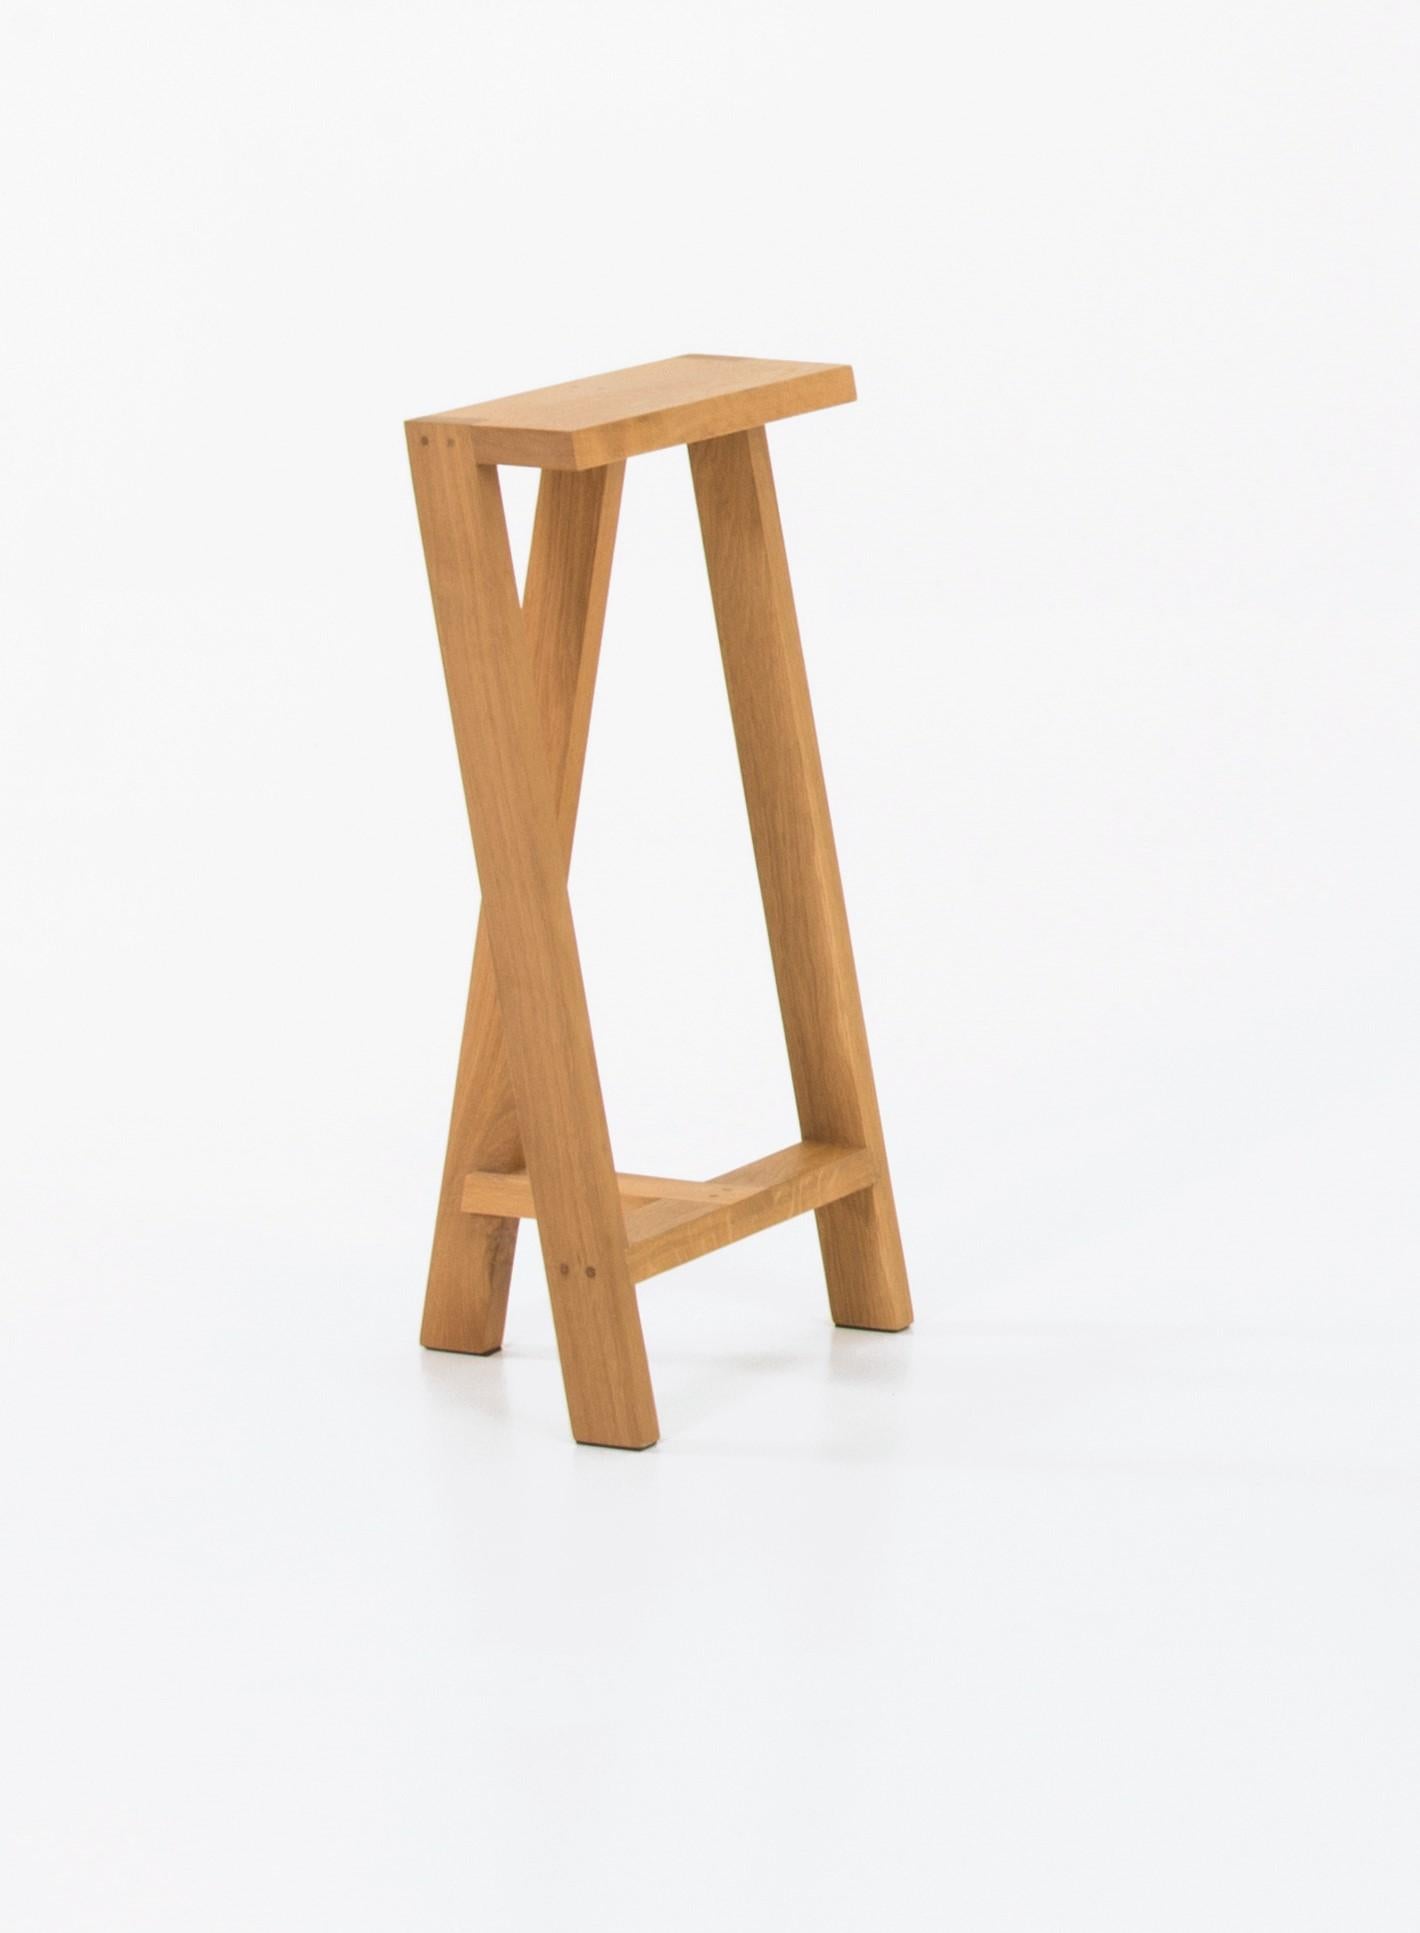 Medium Pausa oak stool by Pierre-Emmanuel Vandeputte
Dimensions: D 27 x W 35 x H 65 cm
Materials: oak wood
Available in burnt oak version and in 3 sizes.

Pausa is a series of stools; 45cm, 65cm, or 80cm of assembled oak pieces. 
The narrow